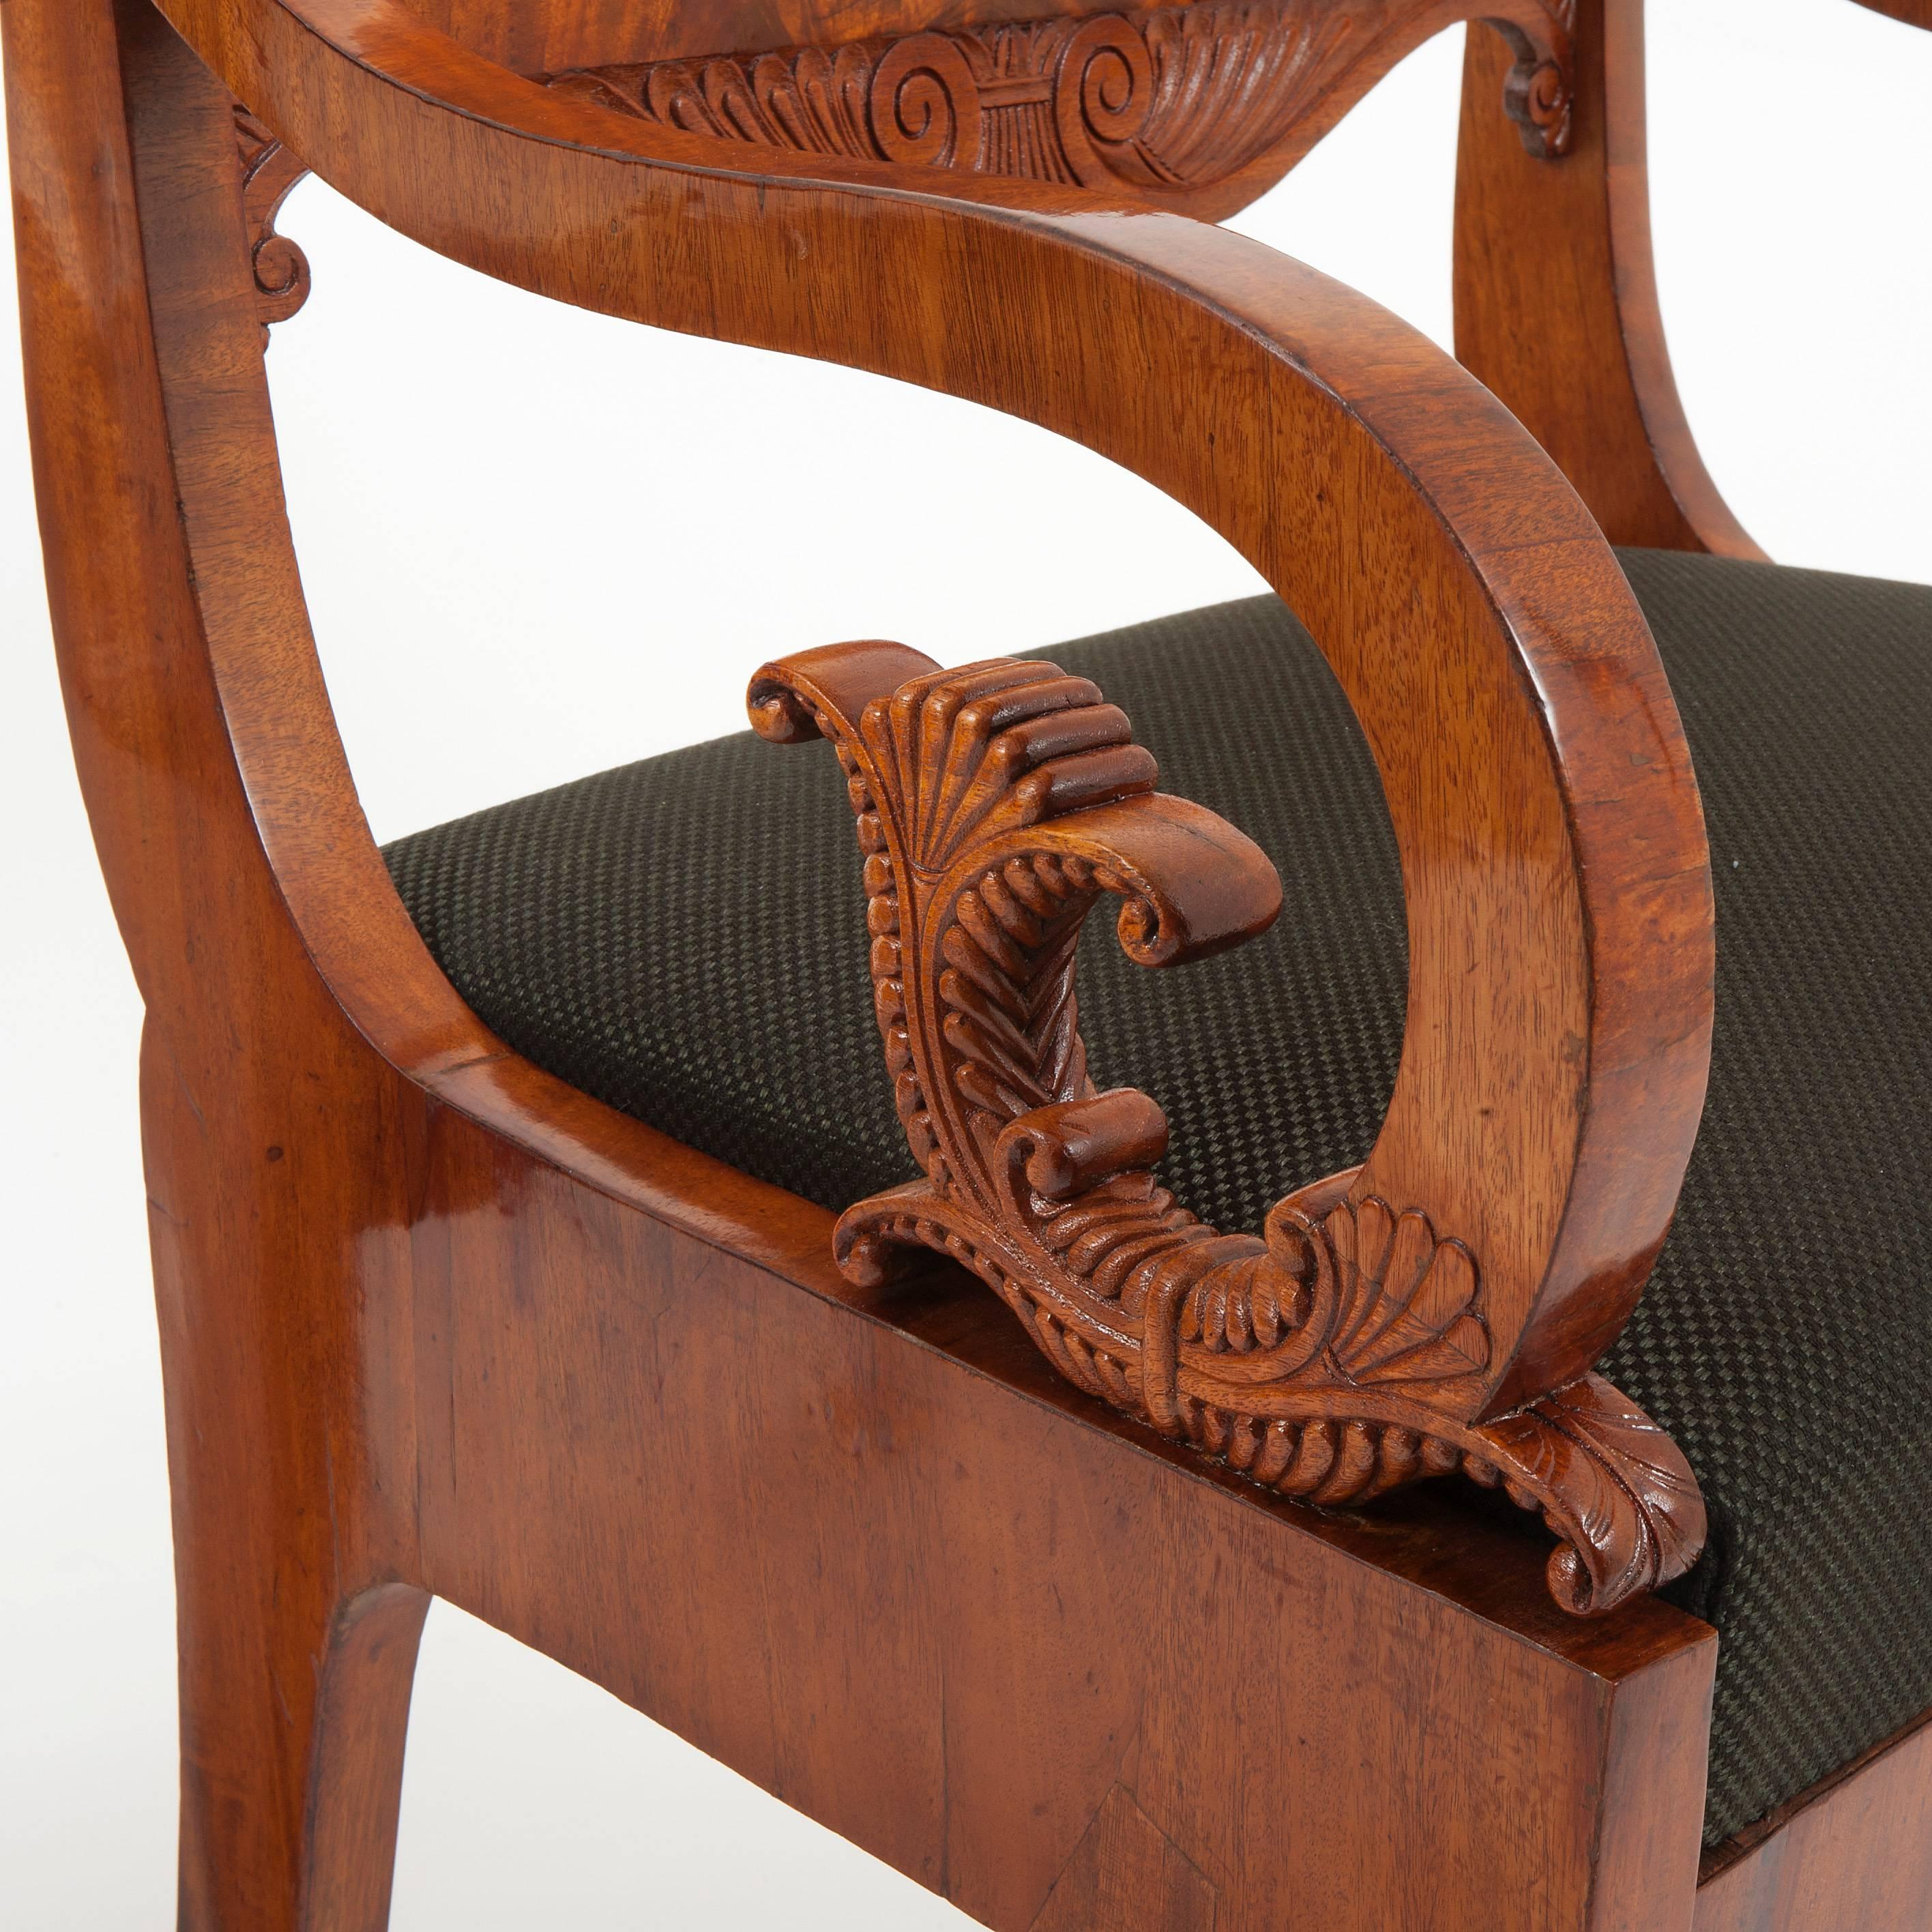 A pair of armchairs on flared legs with short backrests. The backrests are decorated with balusters and rocaille details. The armrests have been masterfully carved.